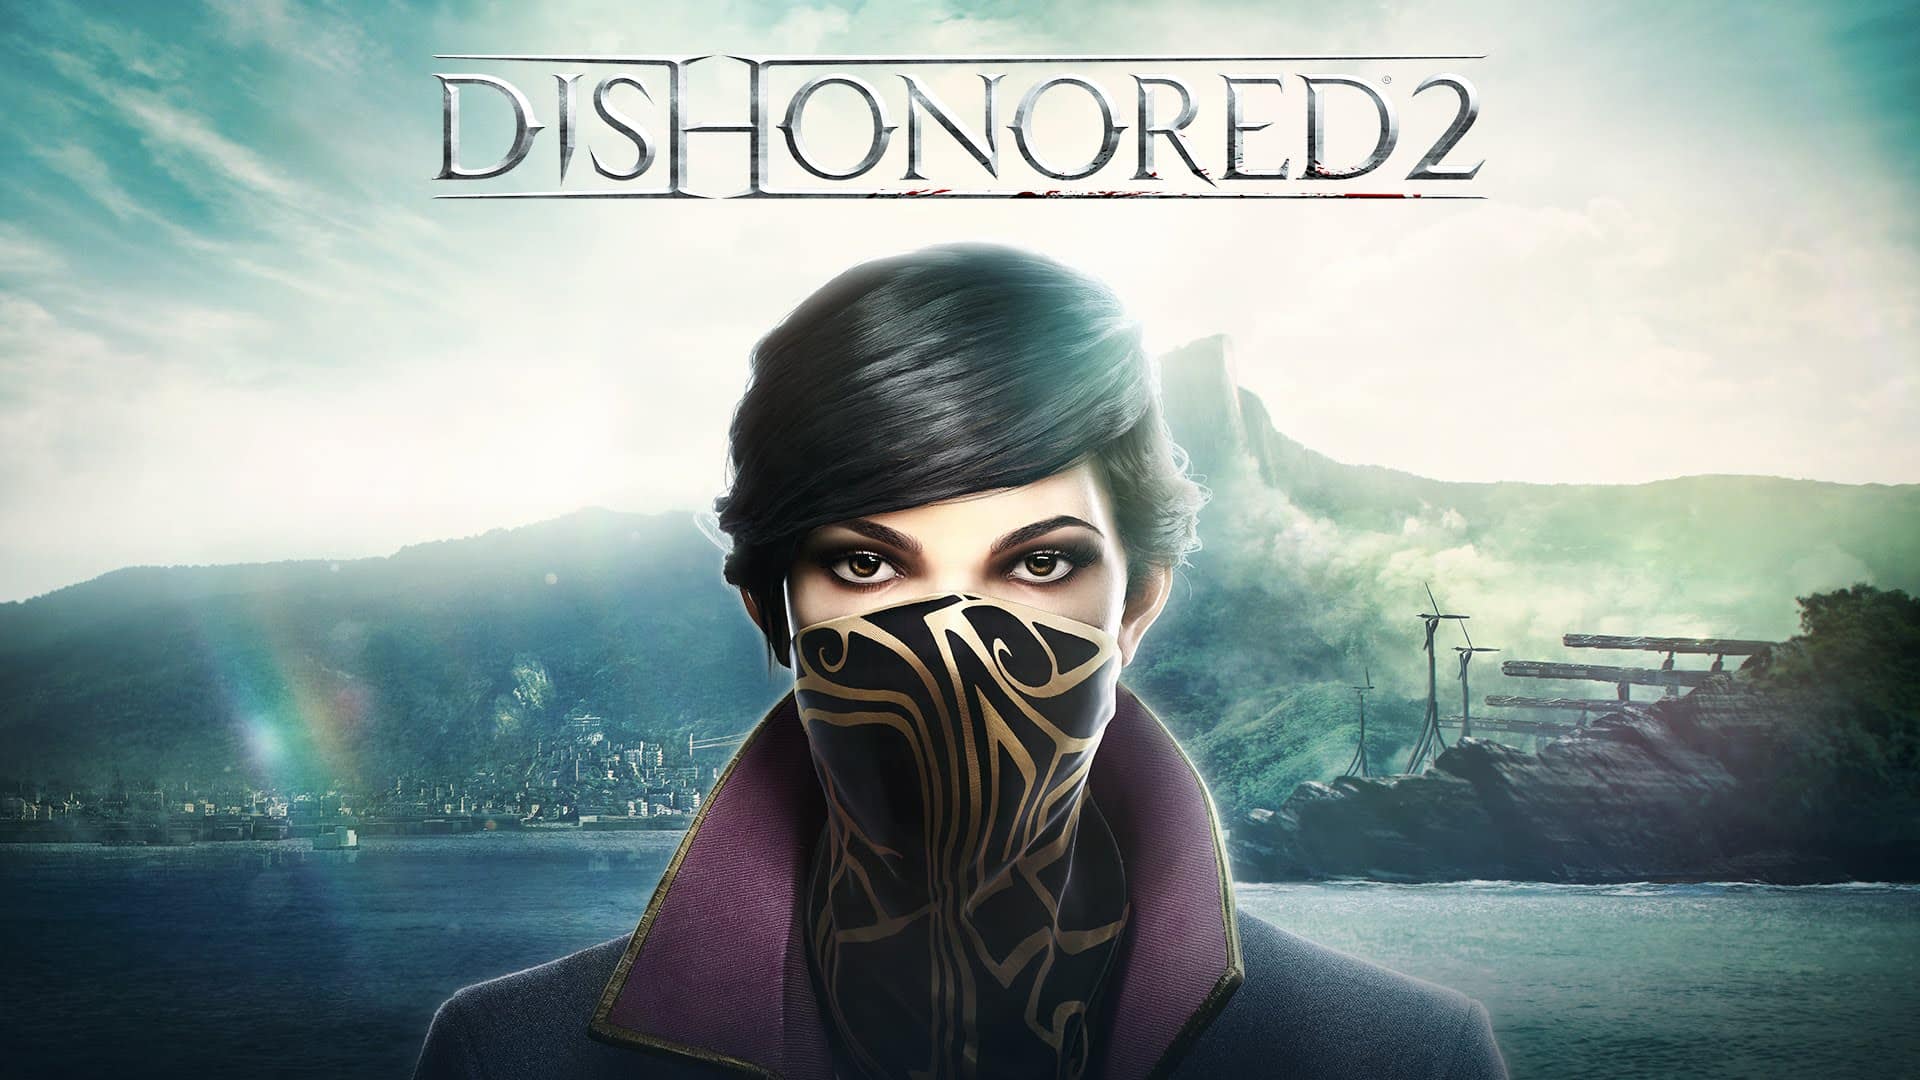 Dishonored 2 Collector's Edition Steelbook Case [G2] *NEW/MINT* NO GAME